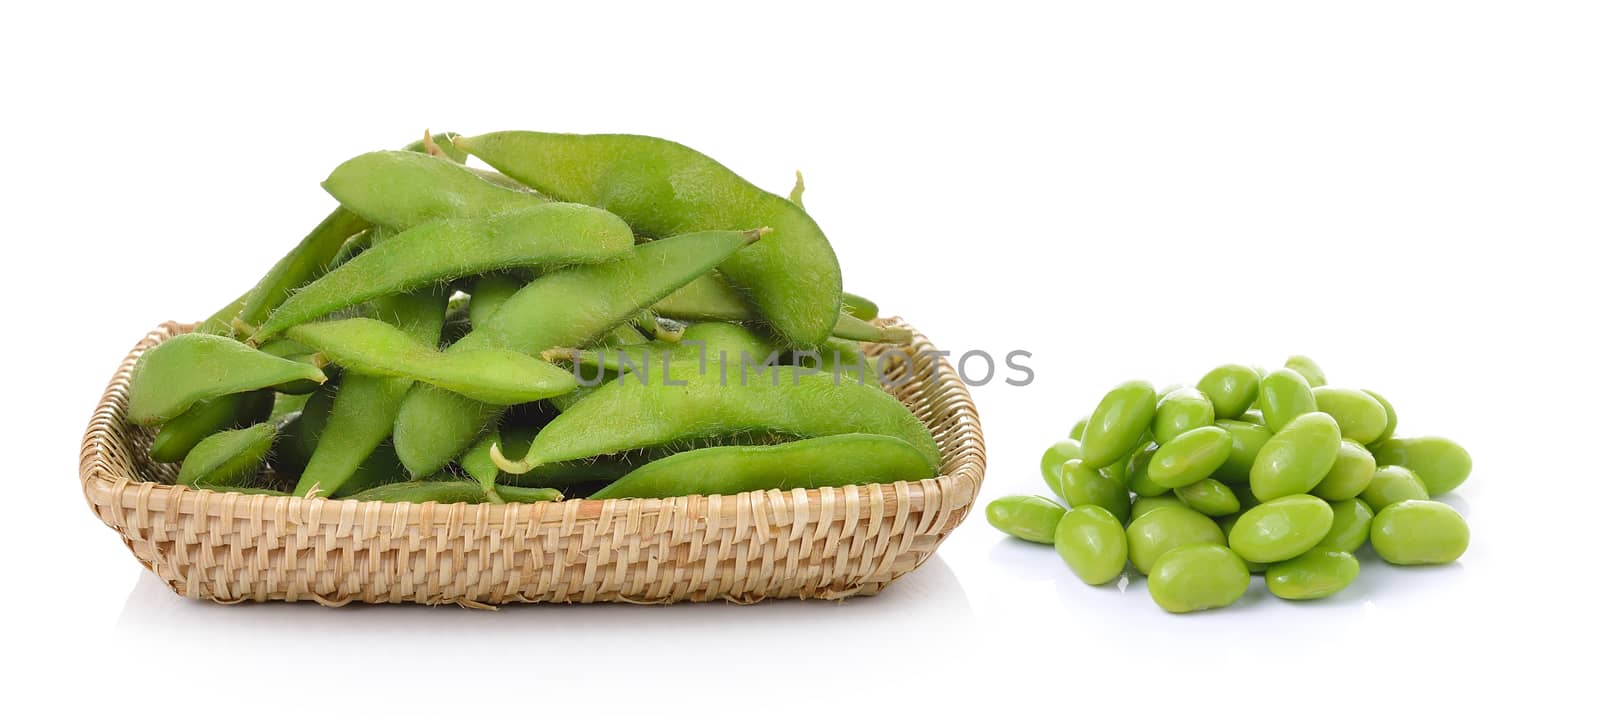 green soybeans in the basket on white background